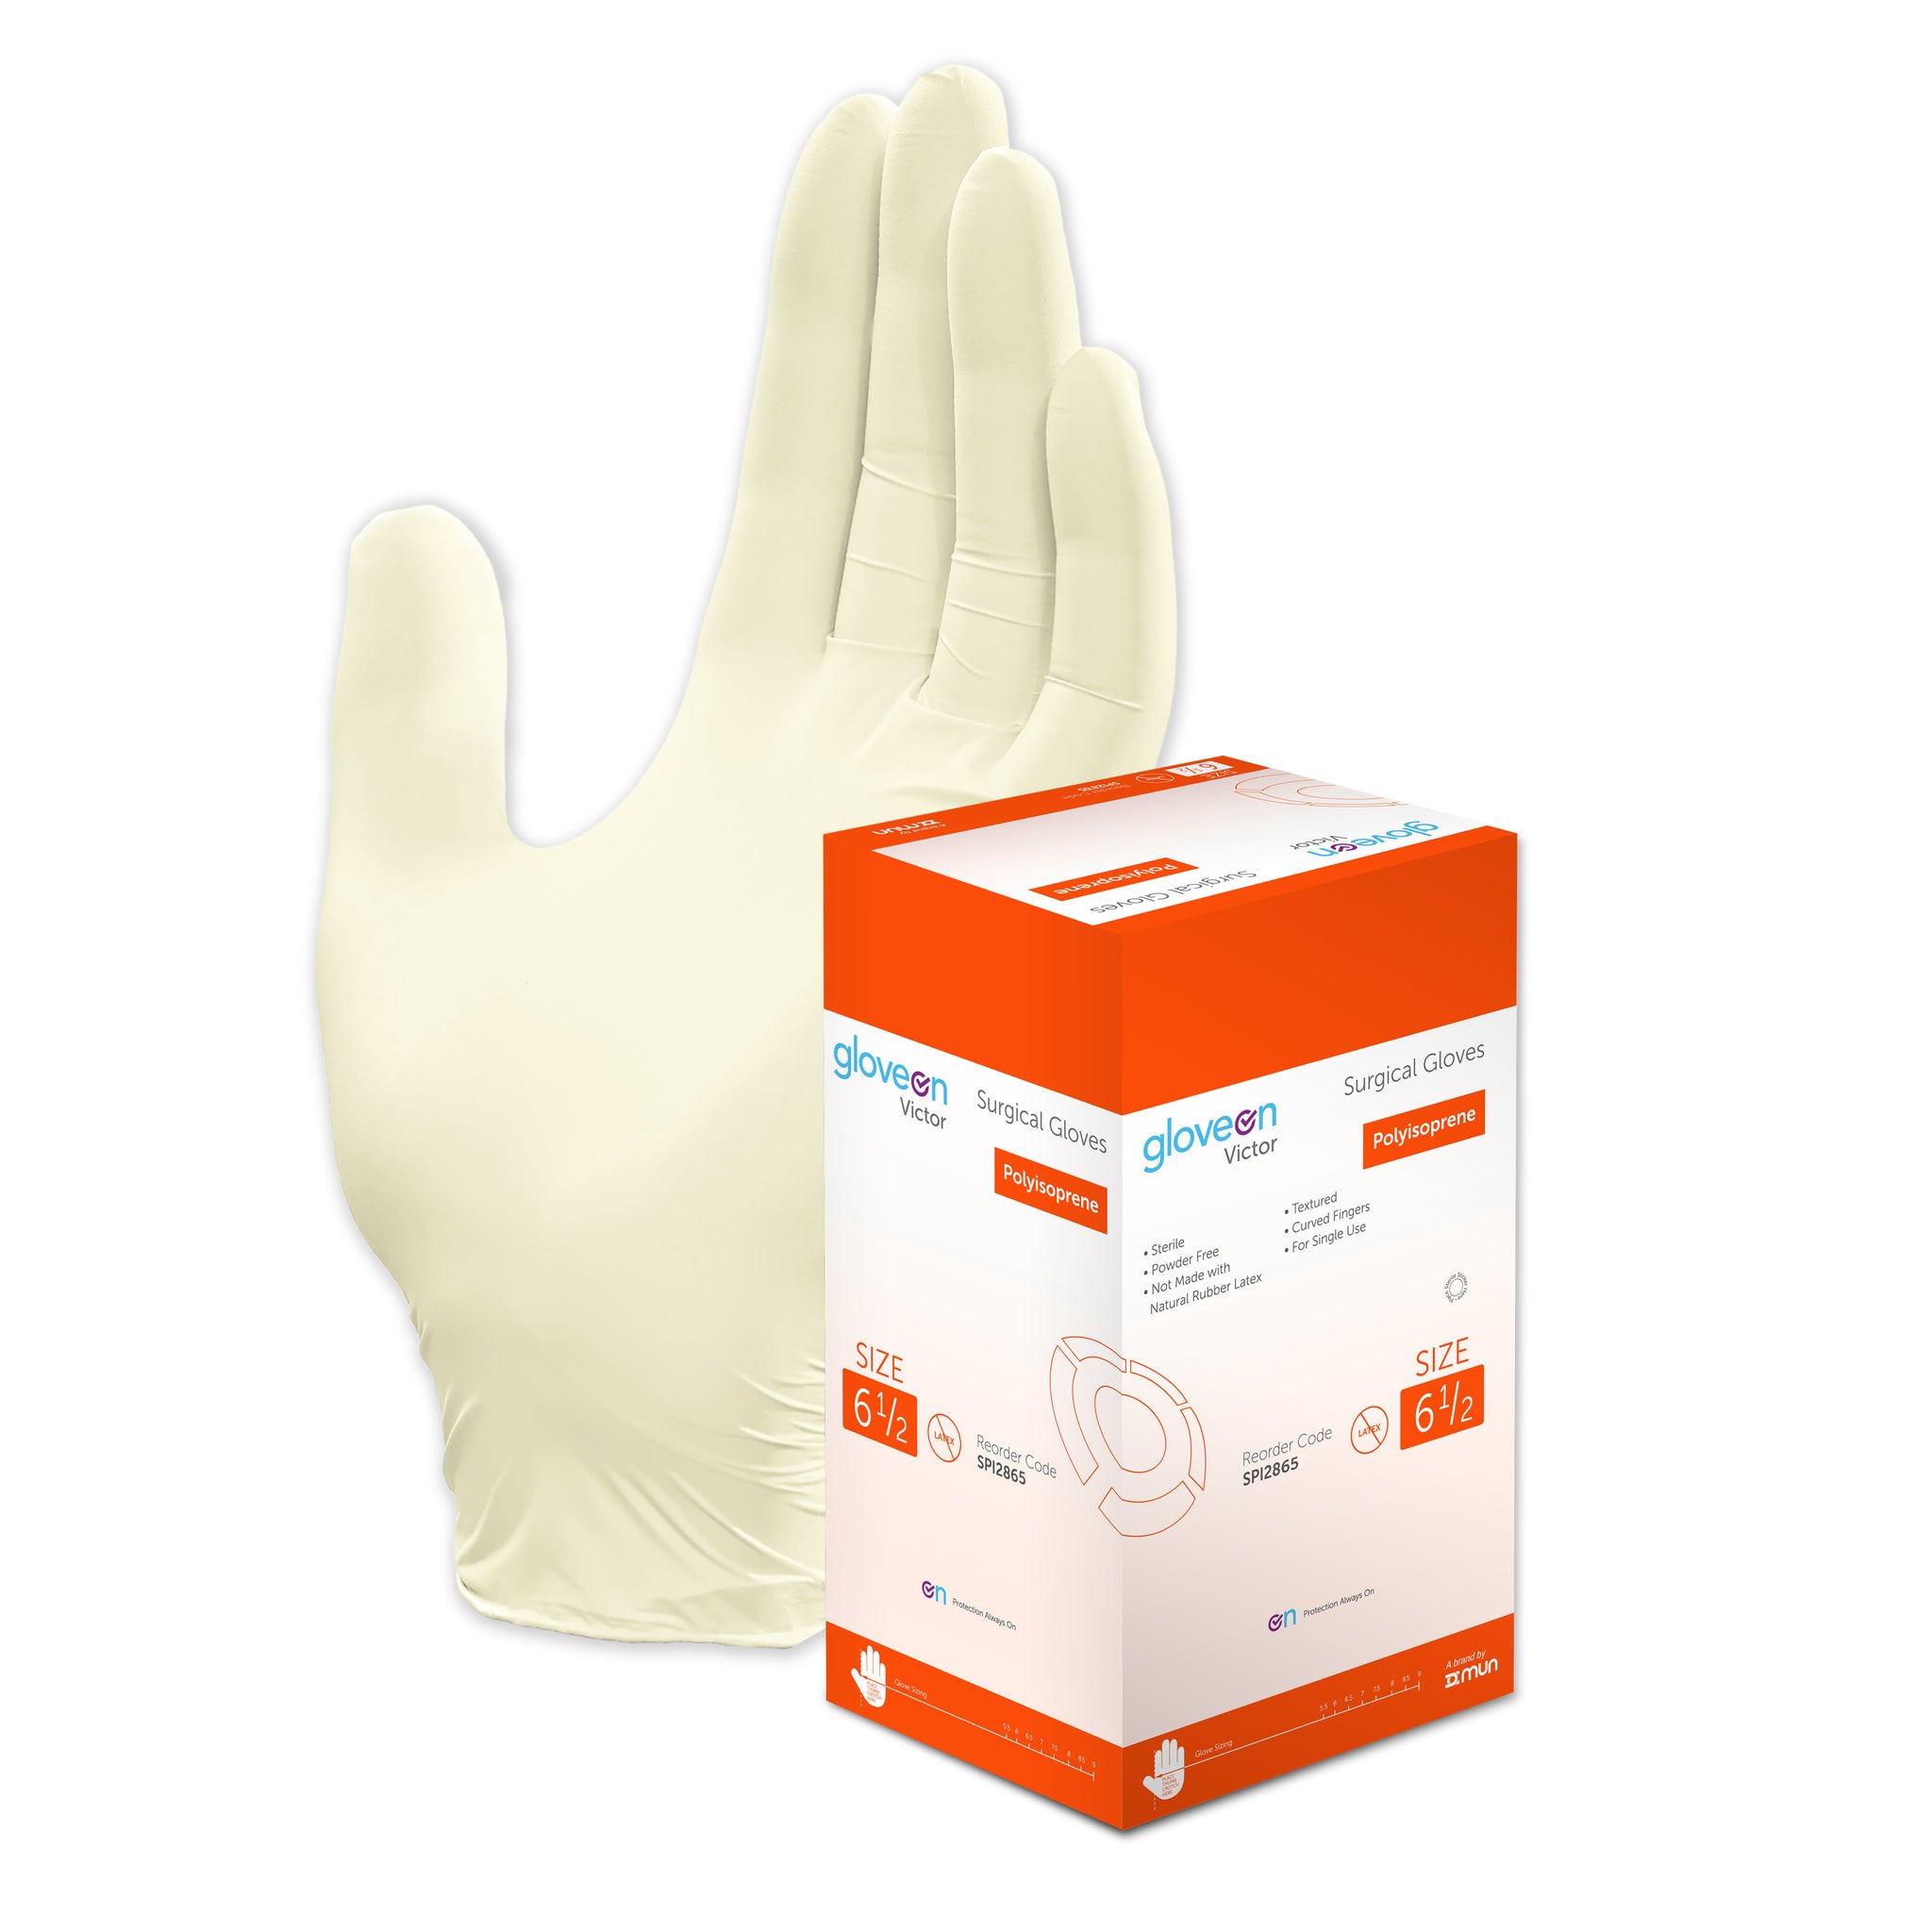 Polyisoprene, Powder Free, Textured, Curved Fingers, Sterile, White - Box of 100, 6.5